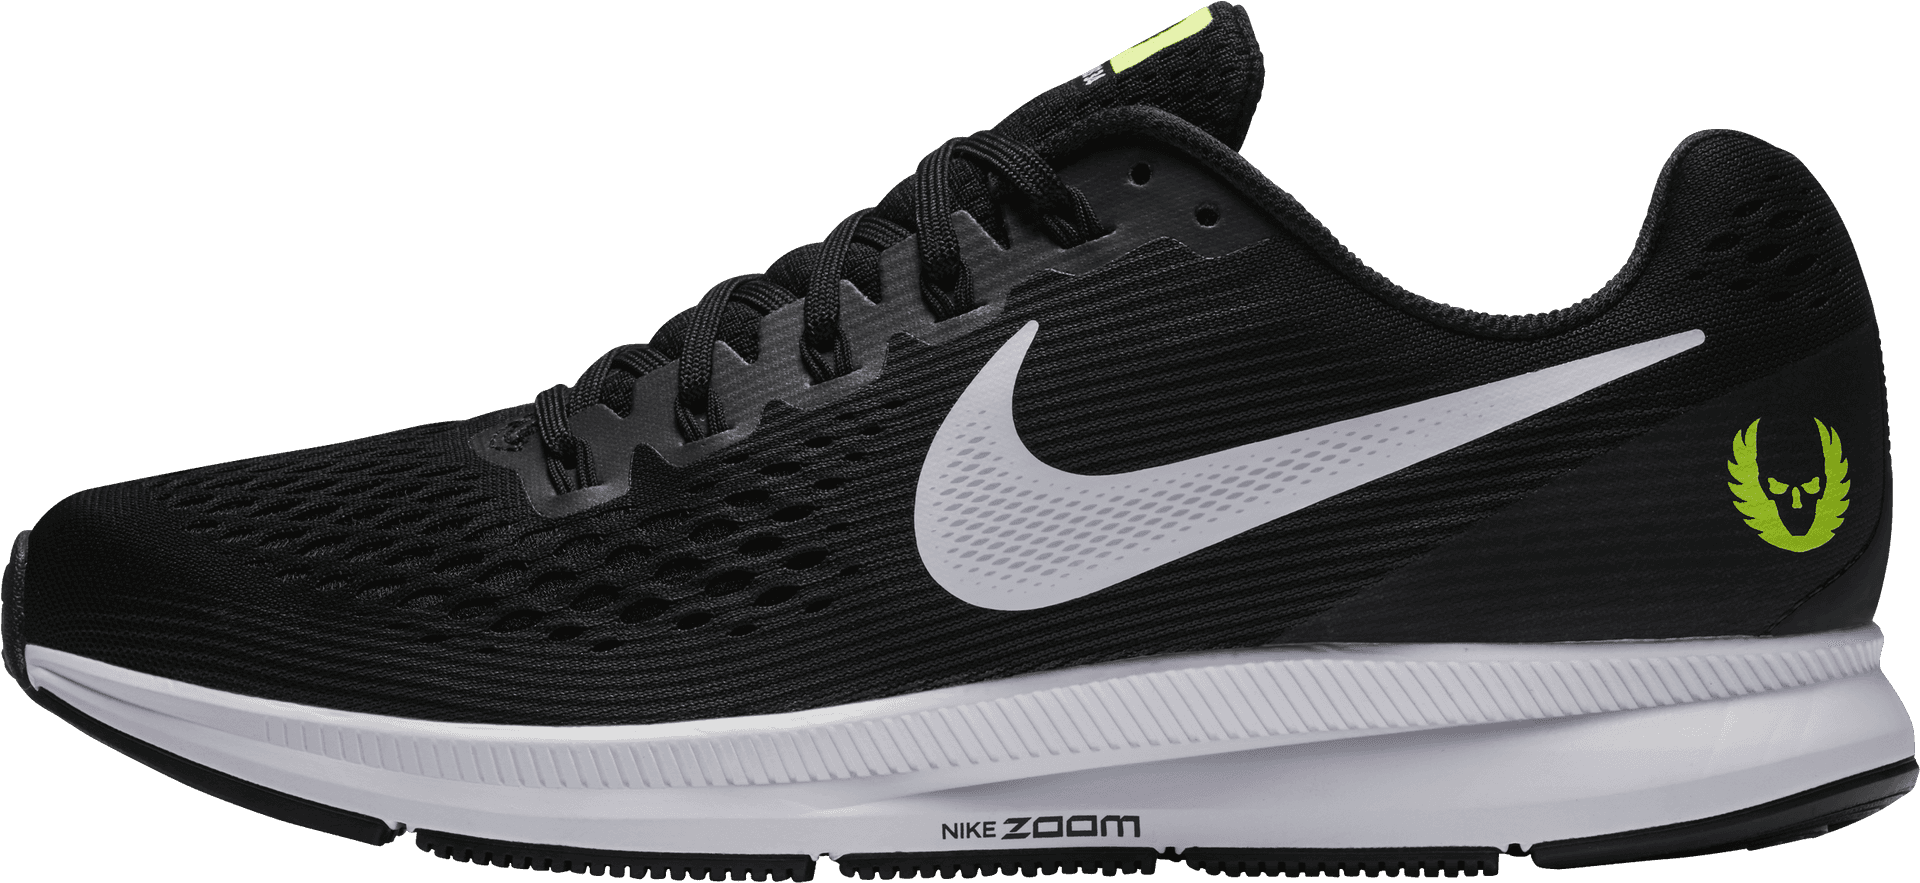 Nike Zoom Running Shoe Side View PNG image